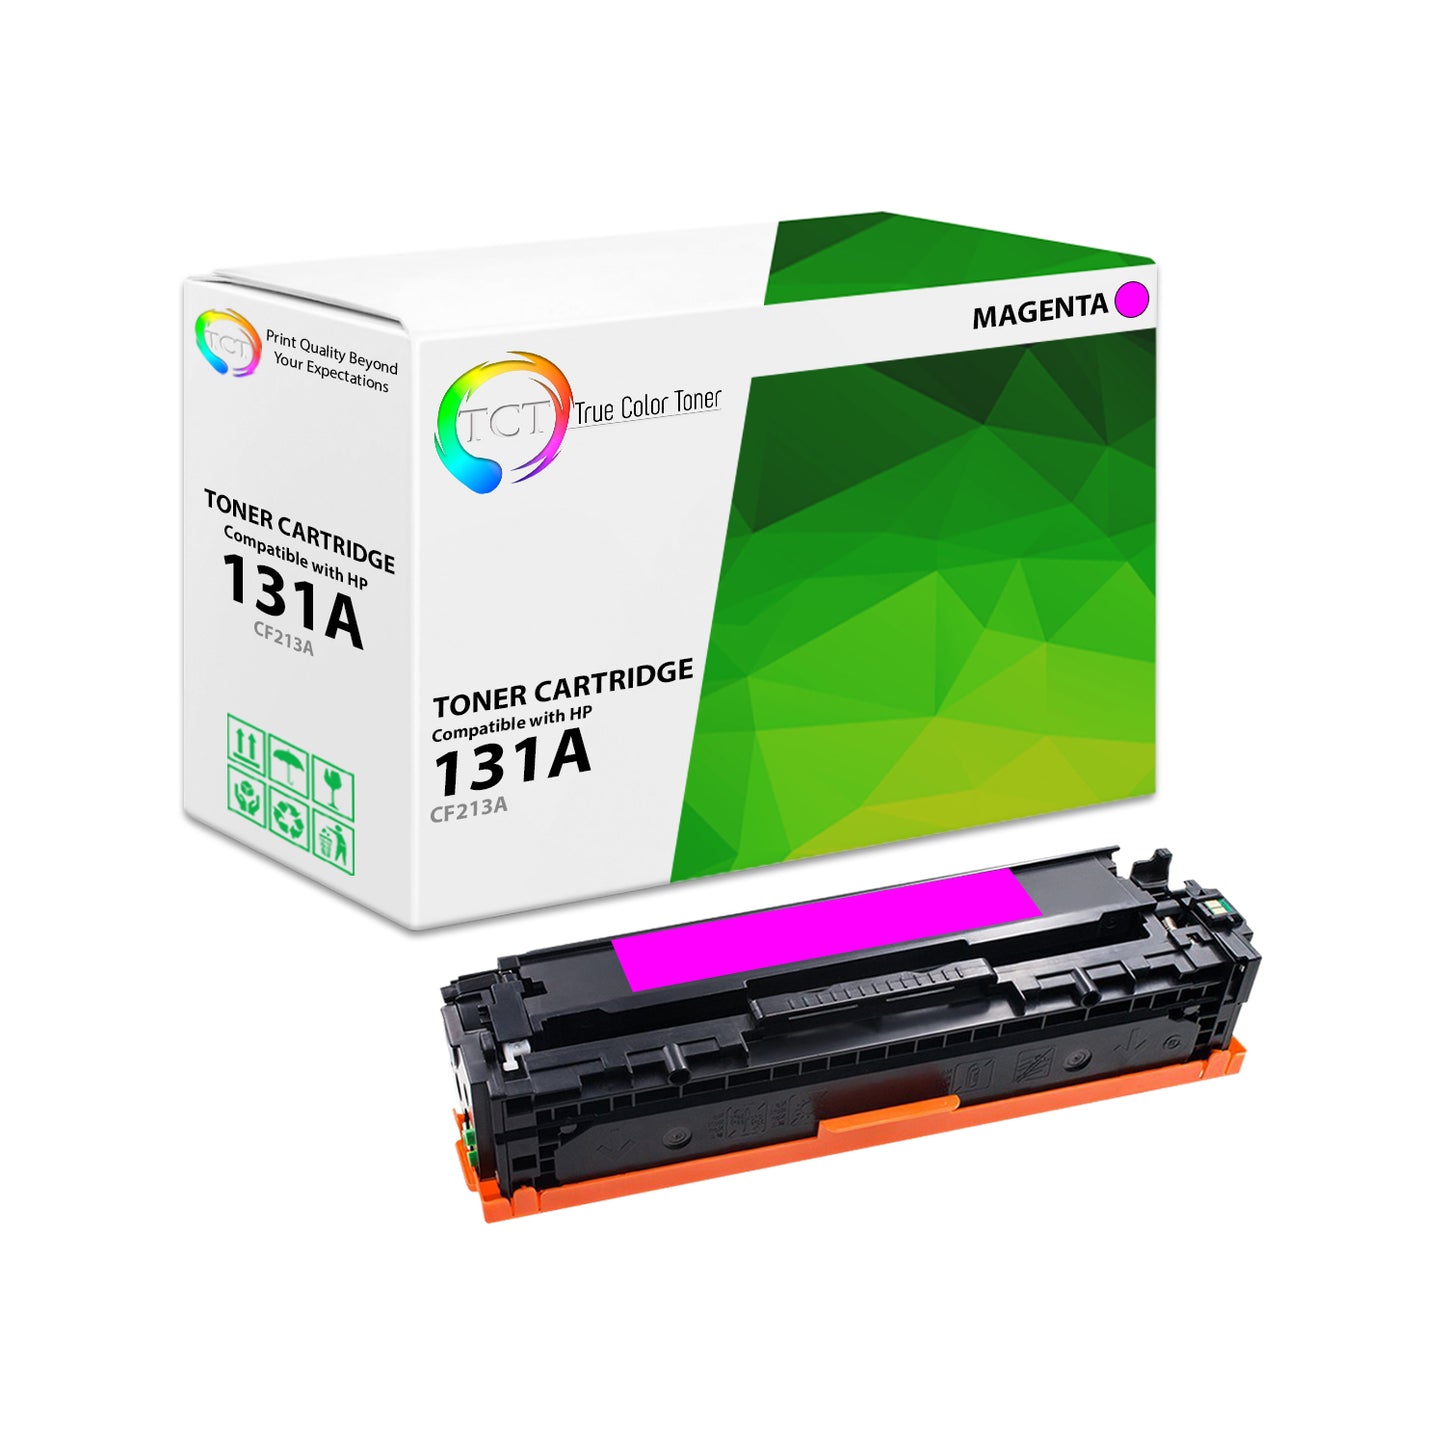 TCT Compatible Toner Cartridge Replacement for the HP 131A Series - 1 Pack Magenta